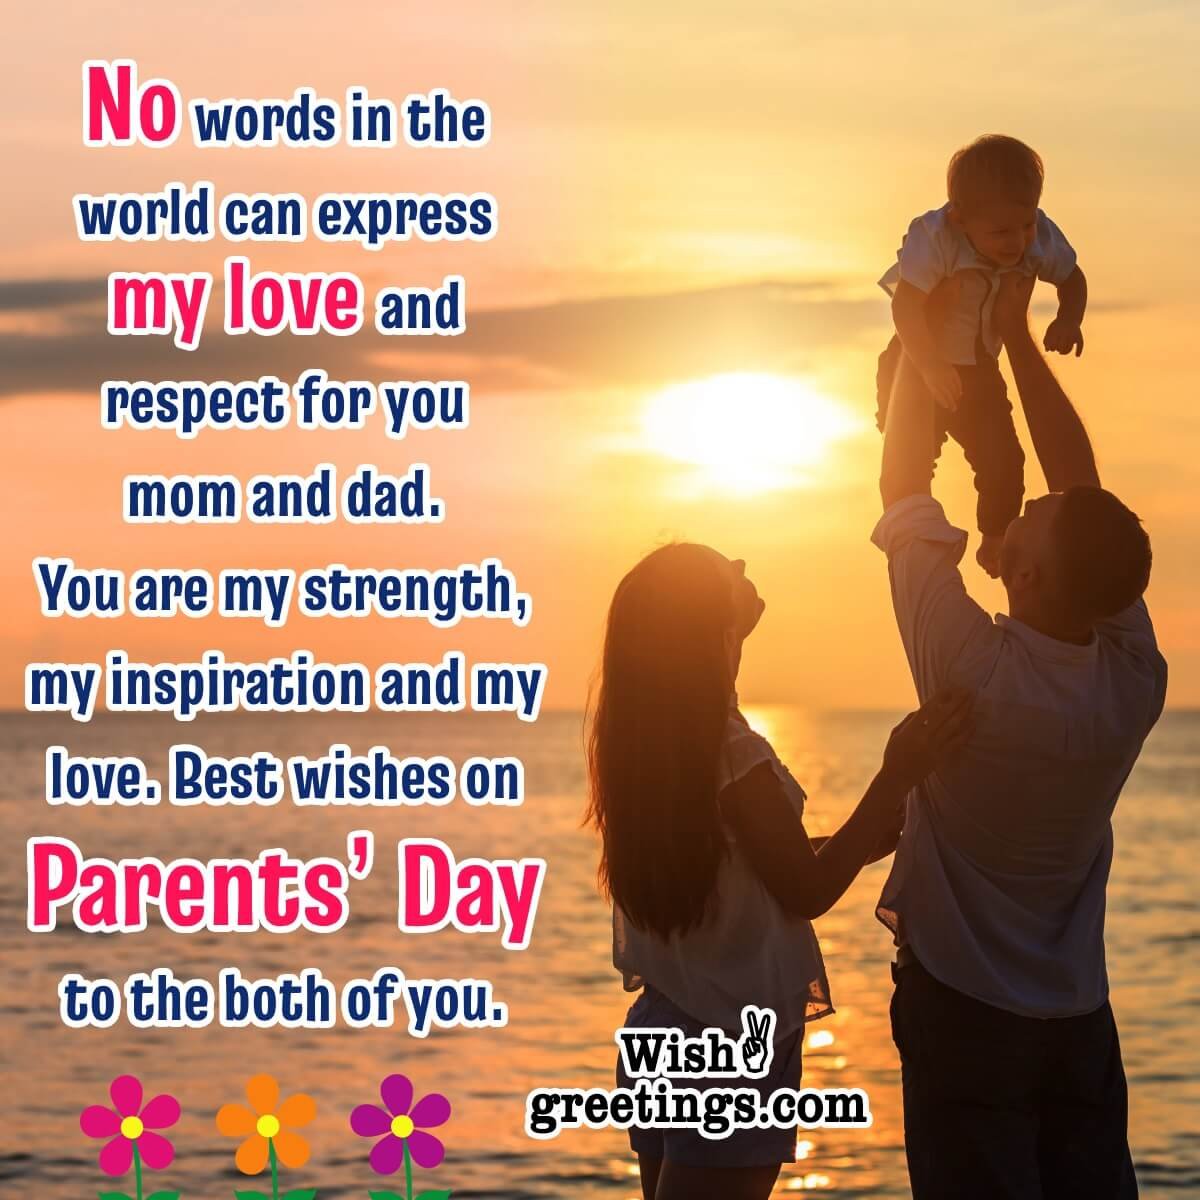 Parents Day Wishes Messages